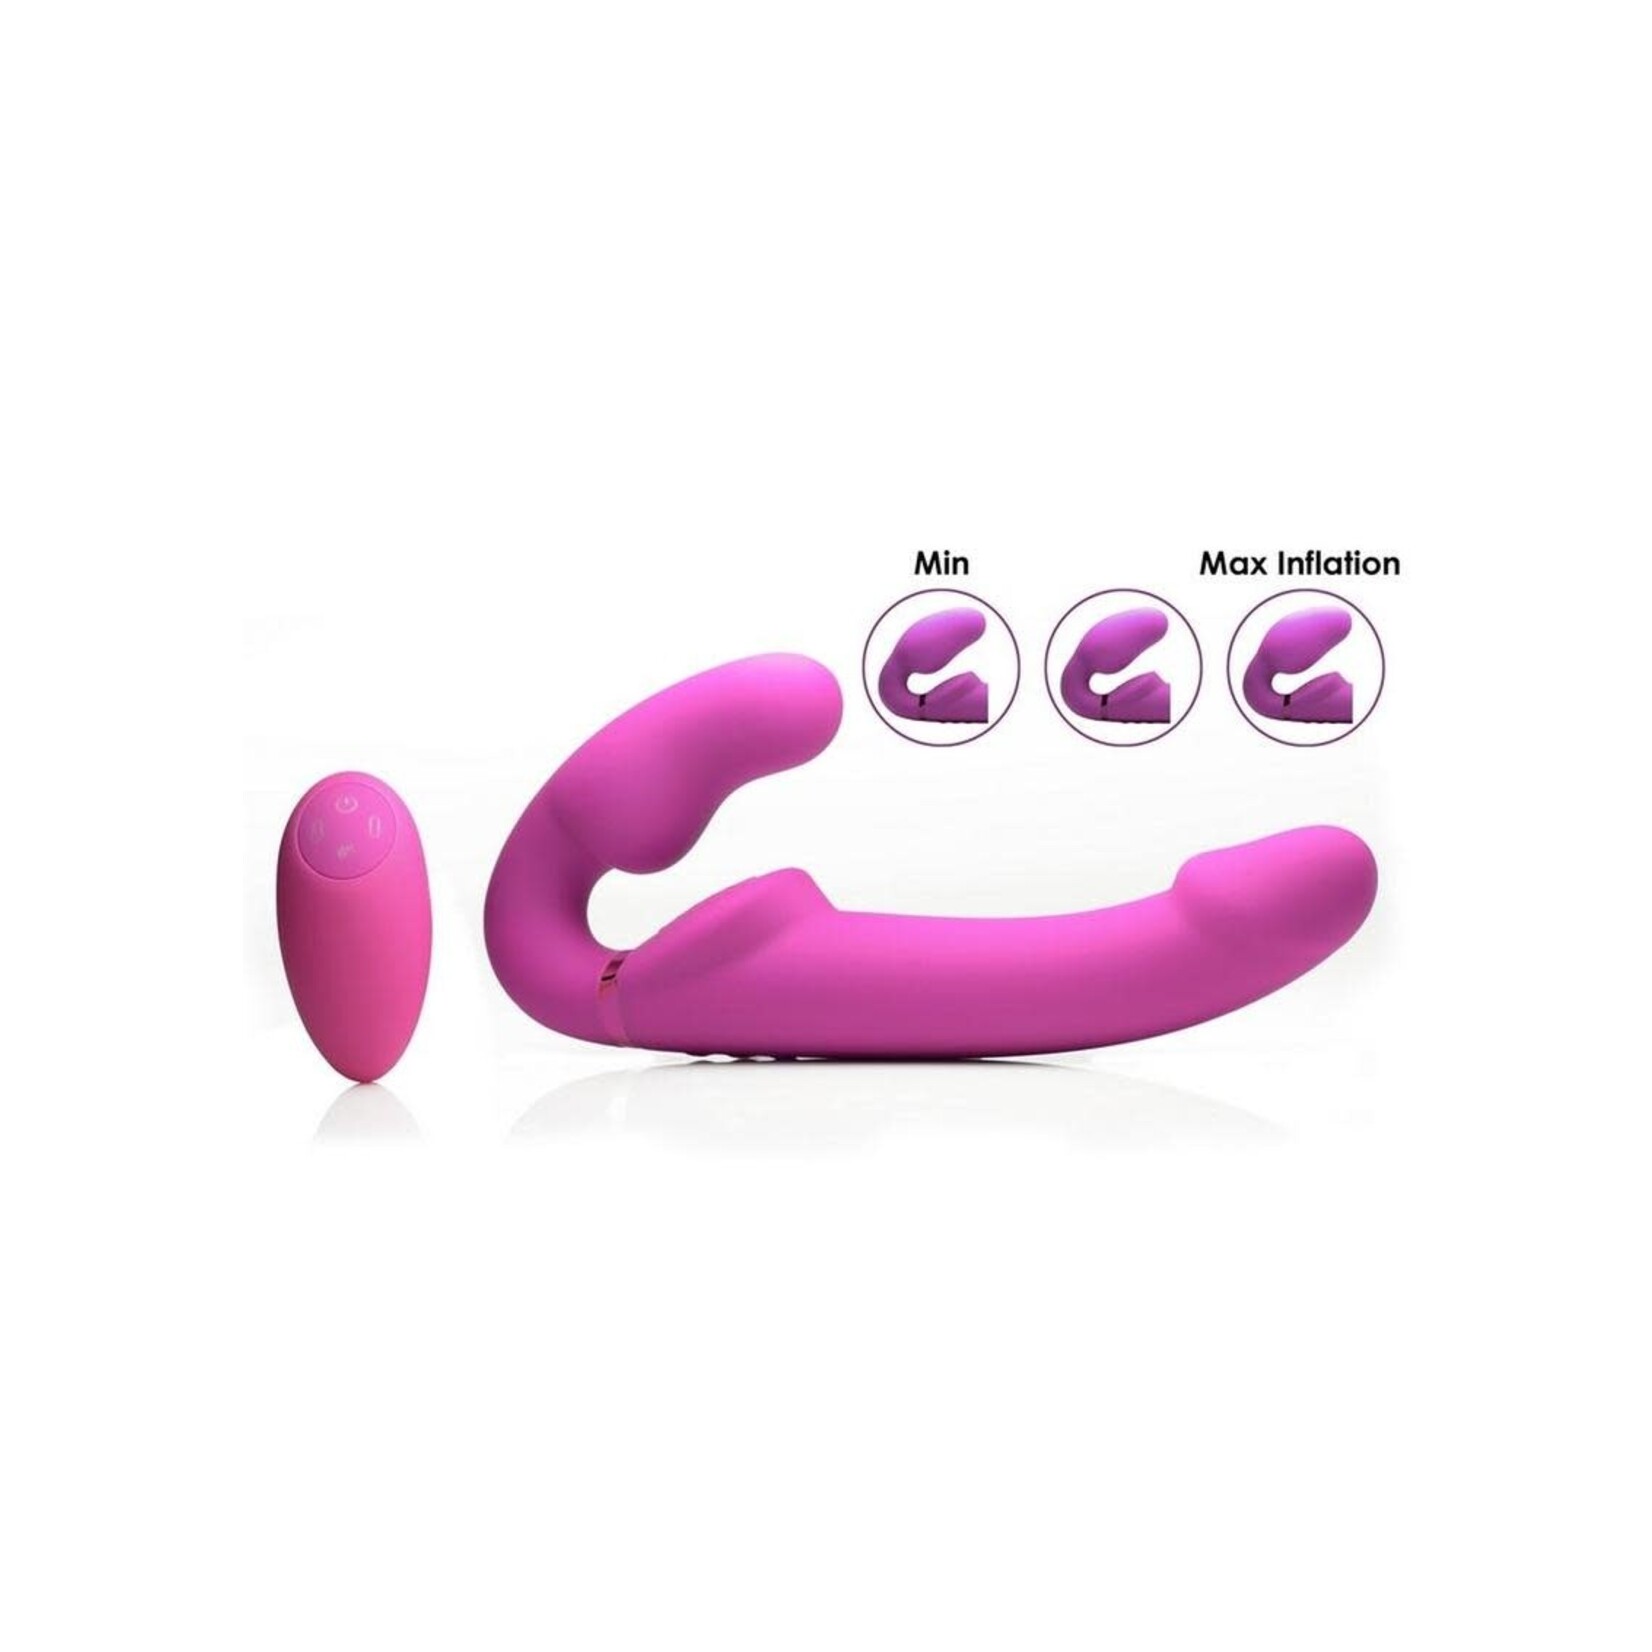 Strap U Evoke Ergo Fit Inflatable & Vibrating Silicone Strapless Strap-on with Remote Control - Pink